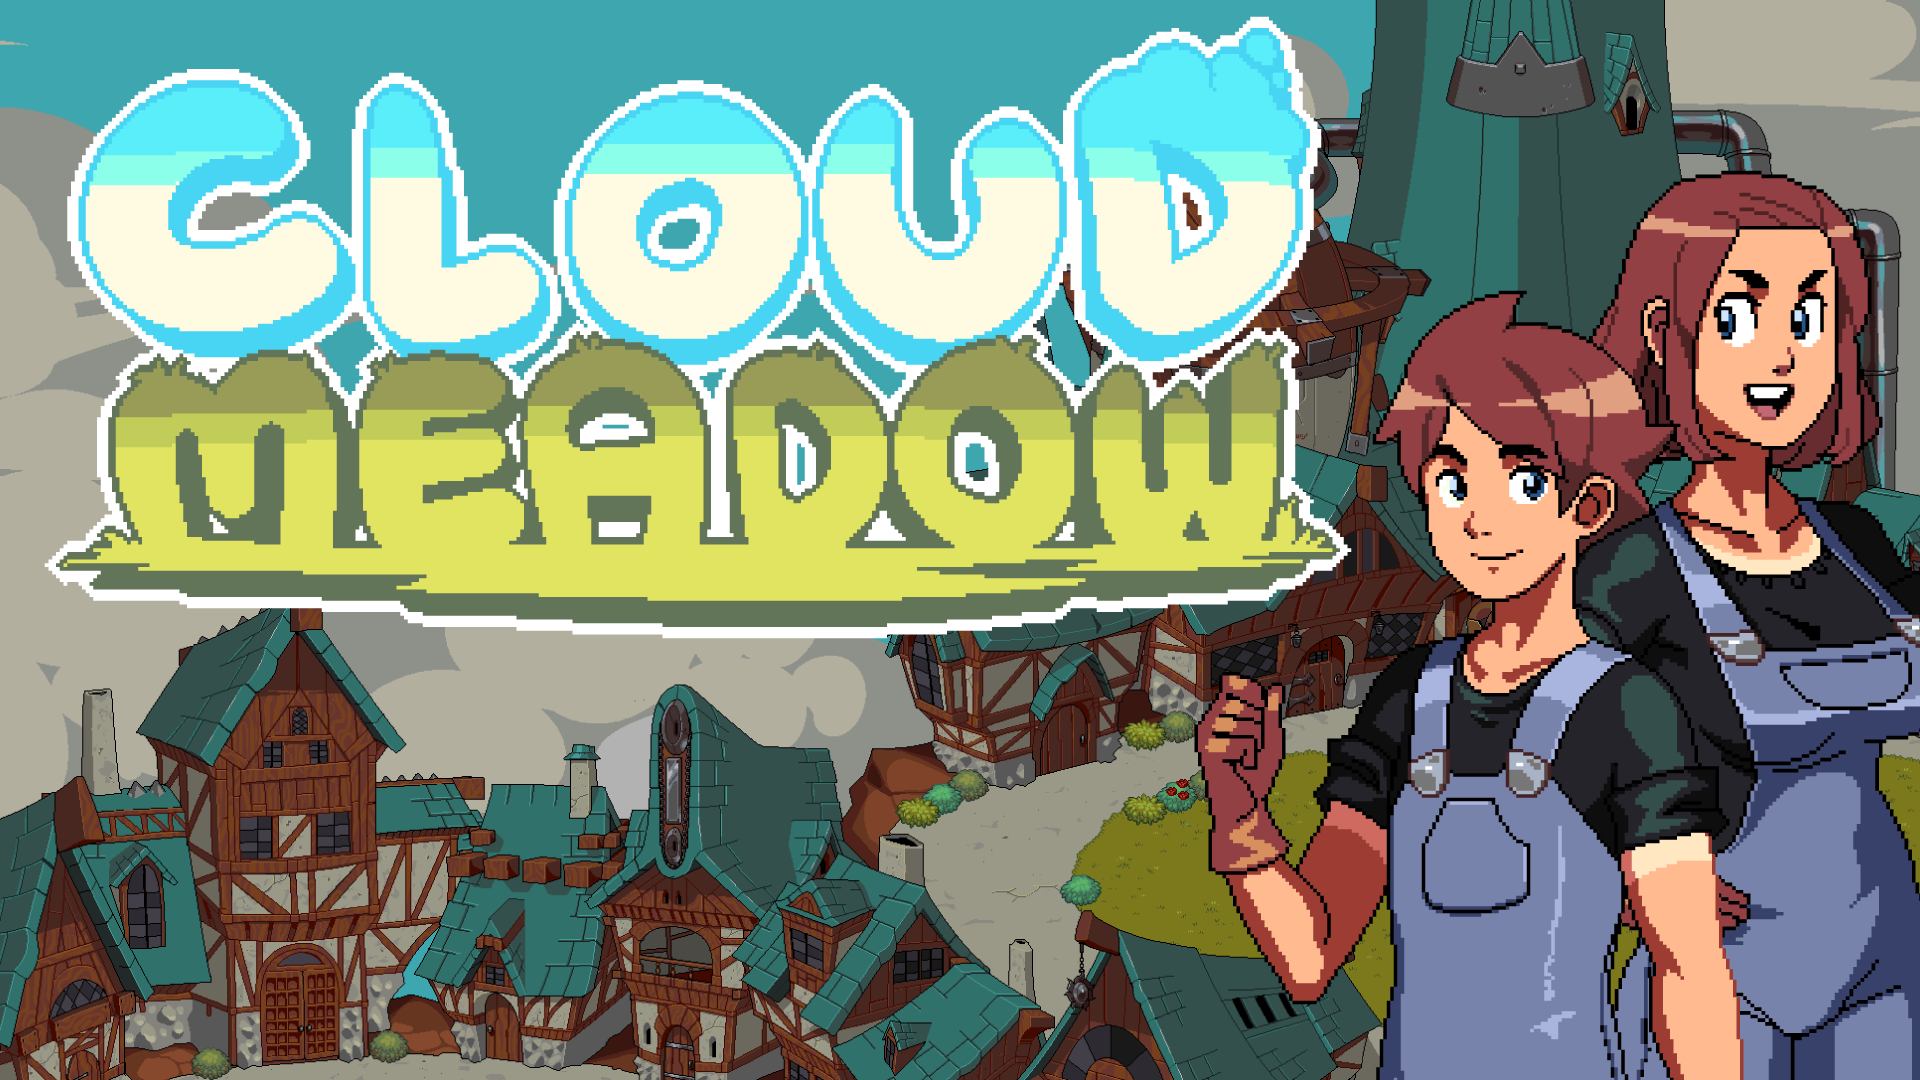 Cloudy meadow game